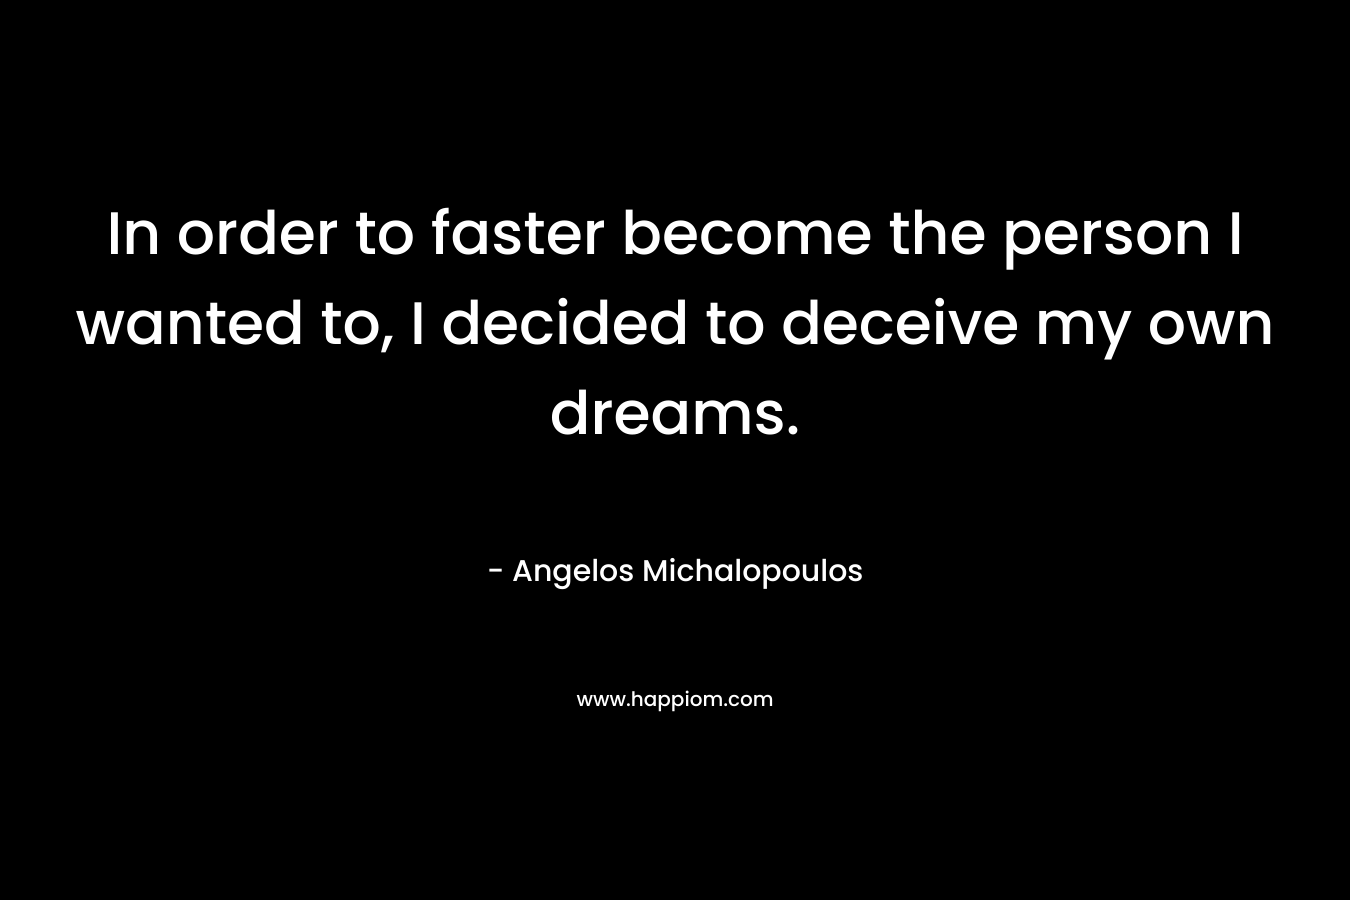 In order to faster become the person I wanted to, I decided to deceive my own dreams.